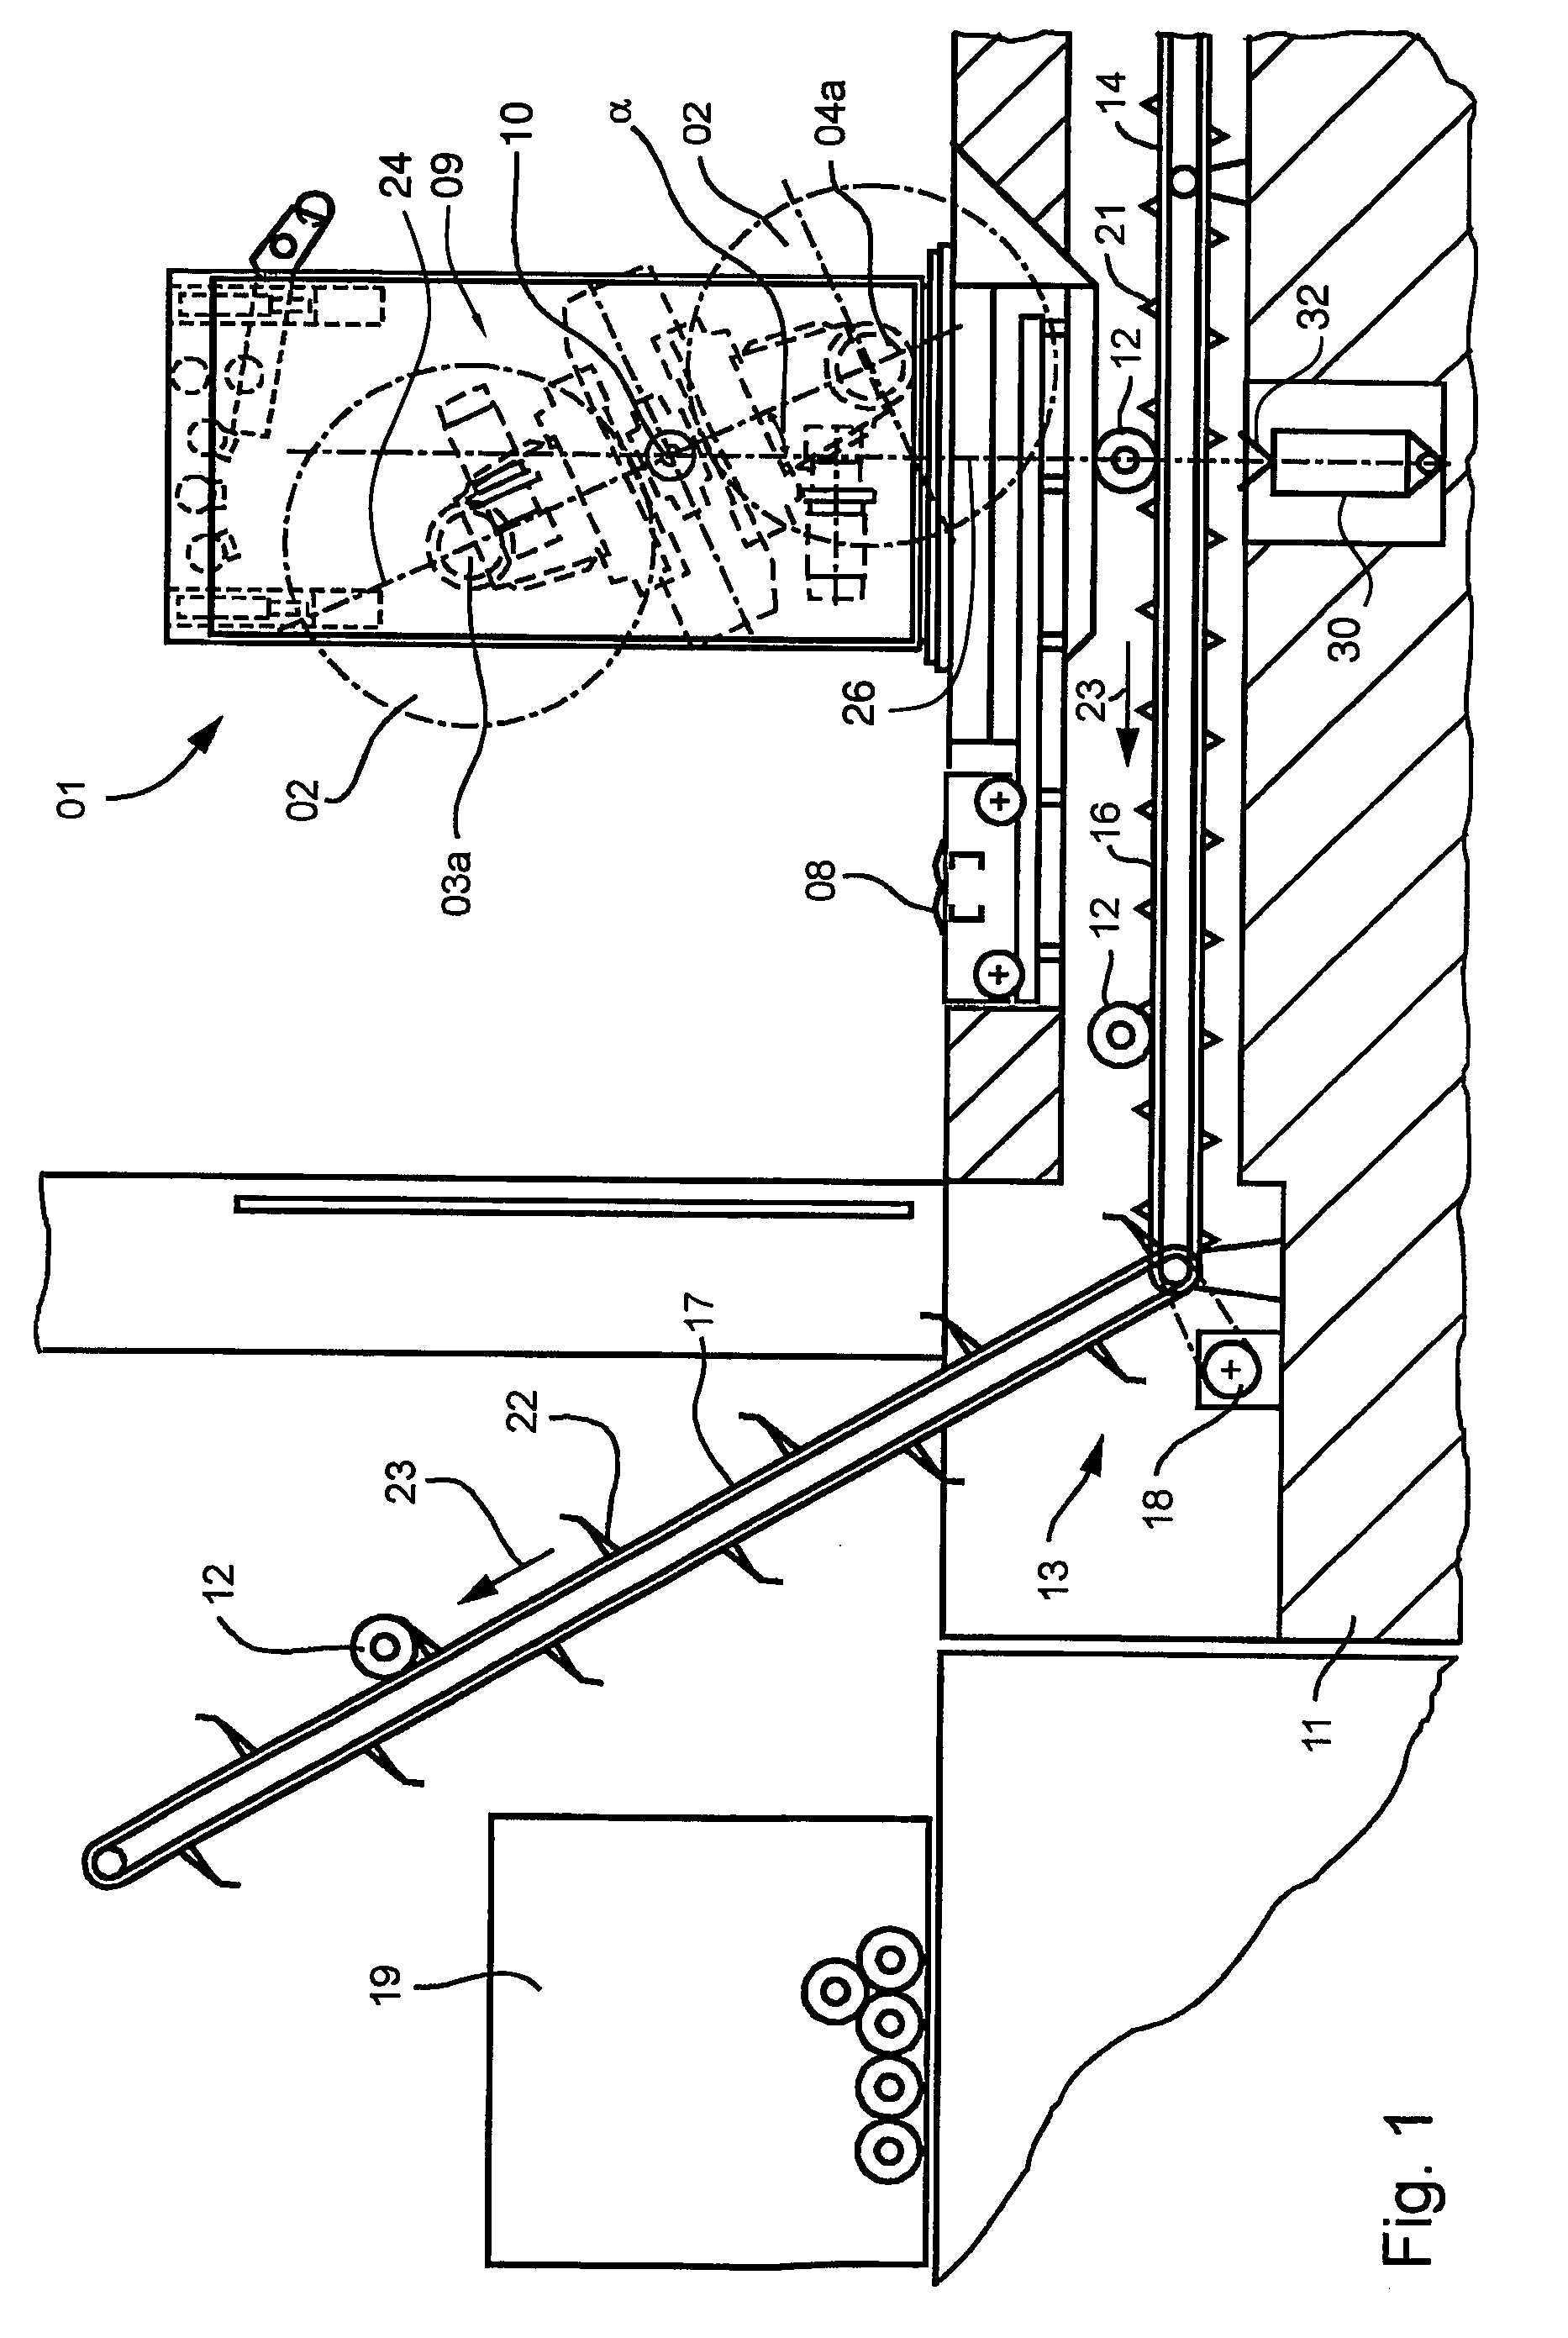 Automatic reel changer comprising a reel stand and a method for disposing of residual reel casings